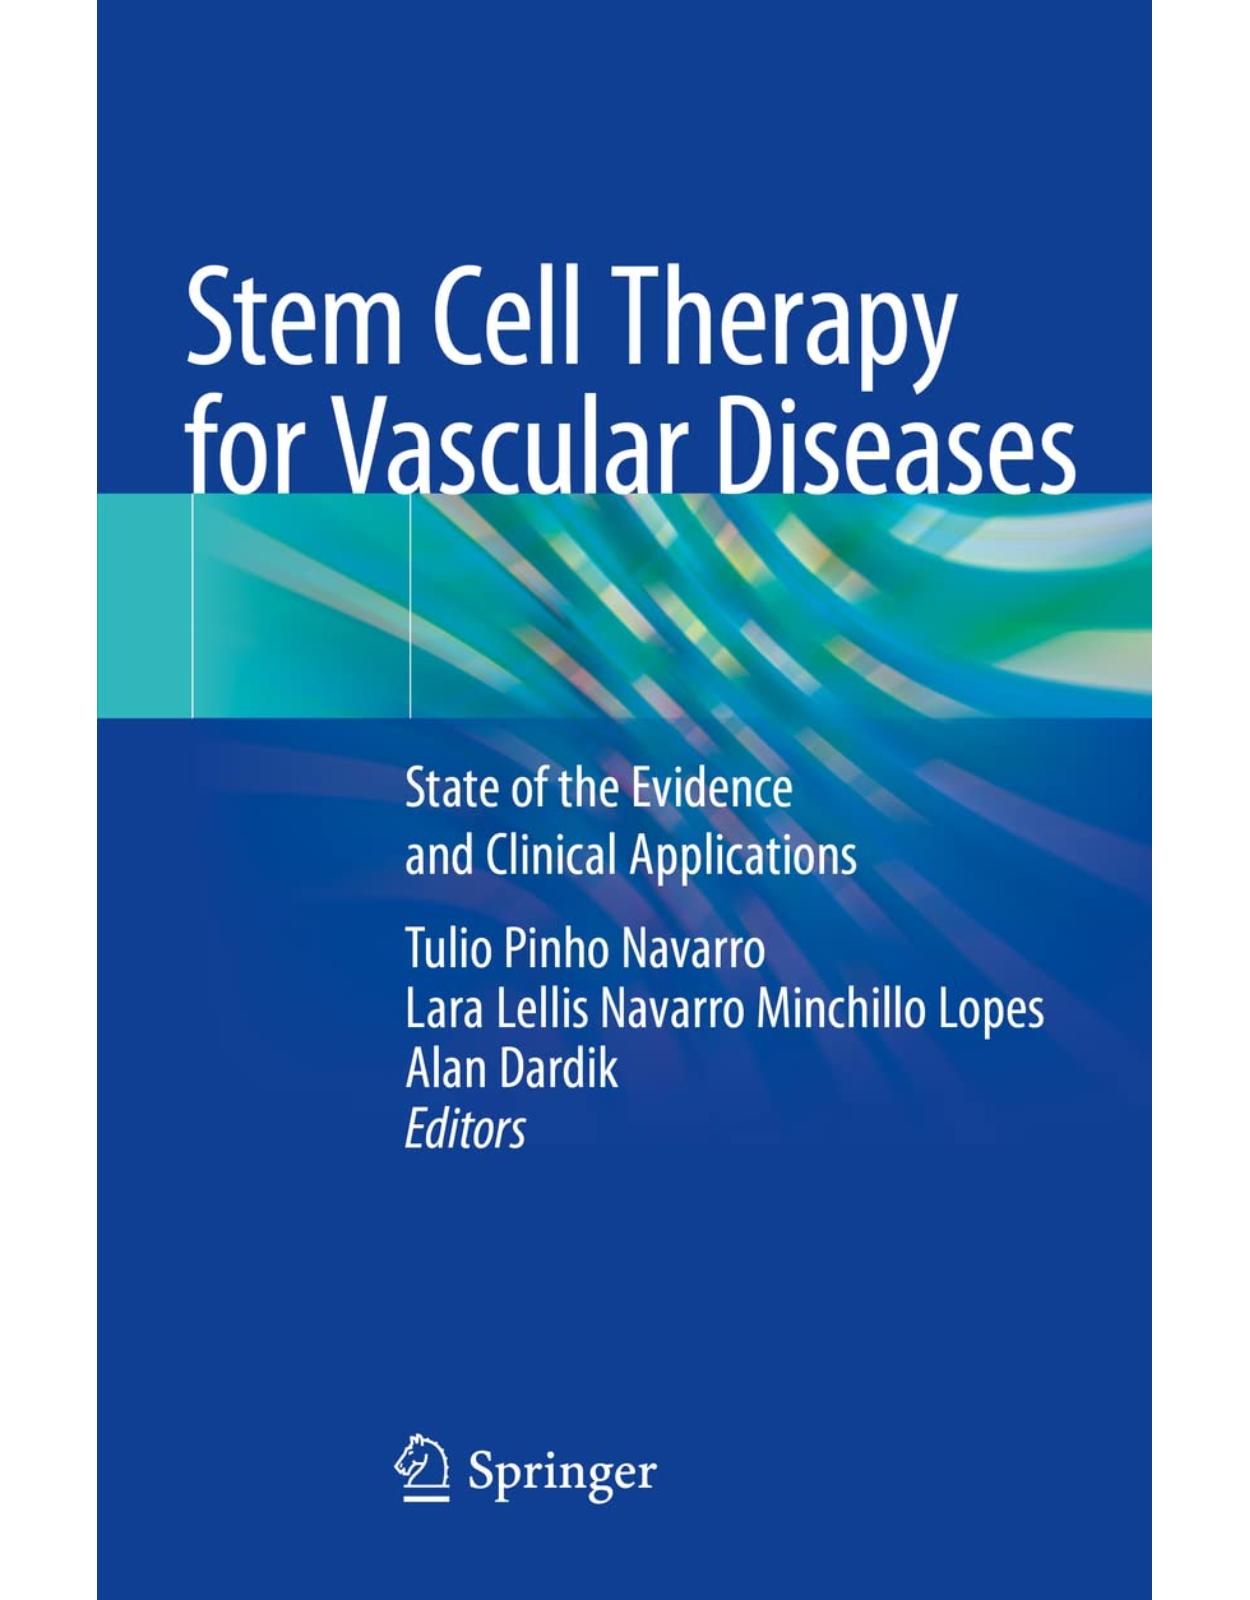 Stem Cell Therapy for Vascular Diseases